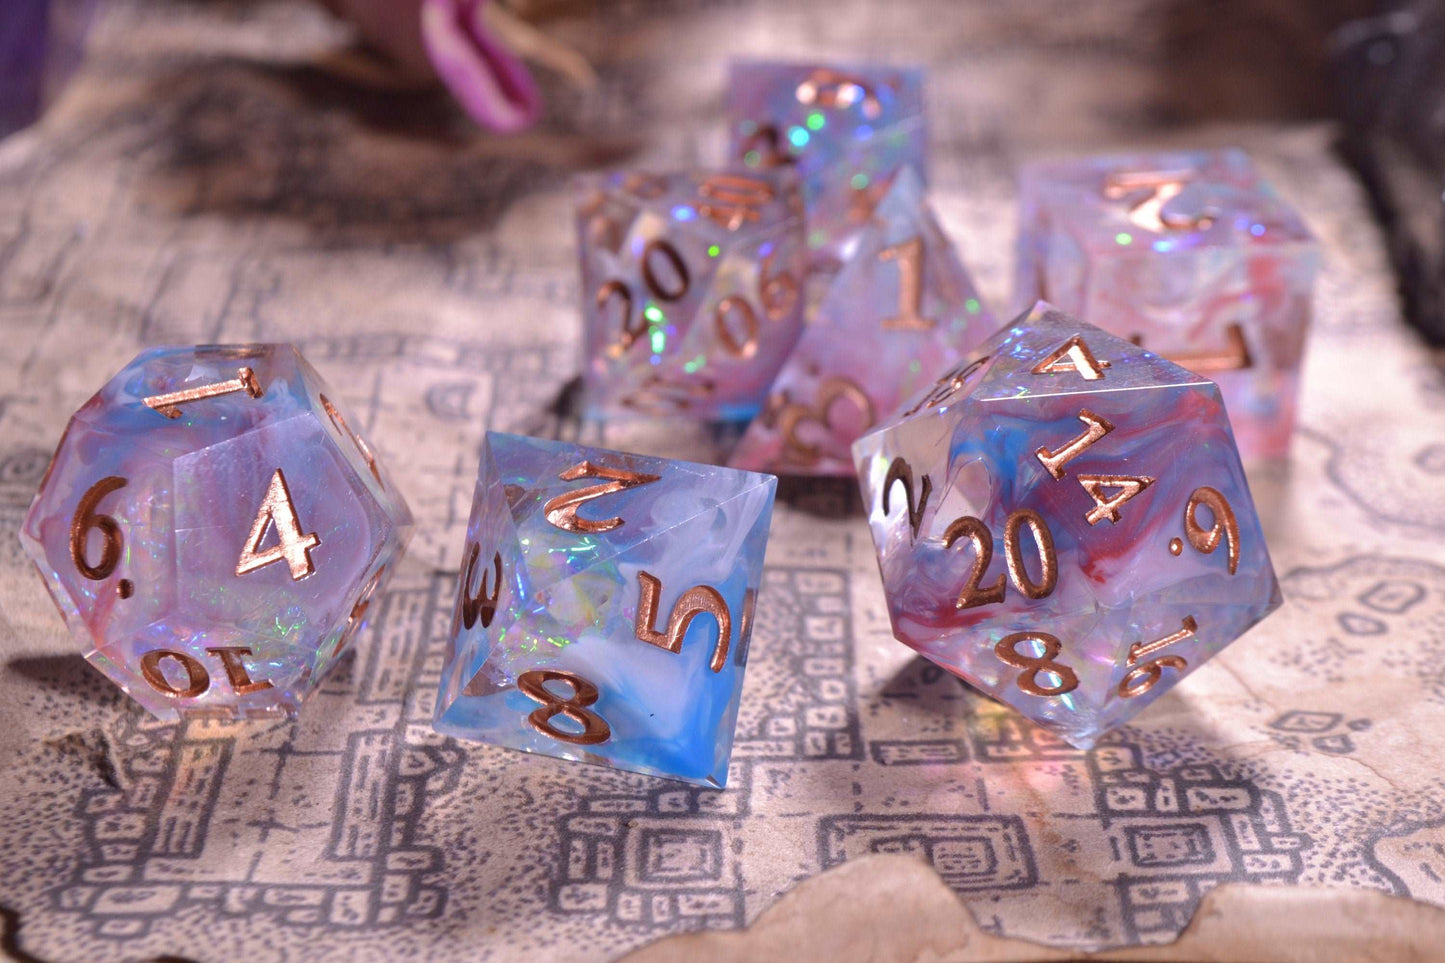 Sharp Edge DnD Pastel Dice Set -  Pastel Pink and Blue - Rose Gold Numbering - Dungeons and Dragons - Gift Set